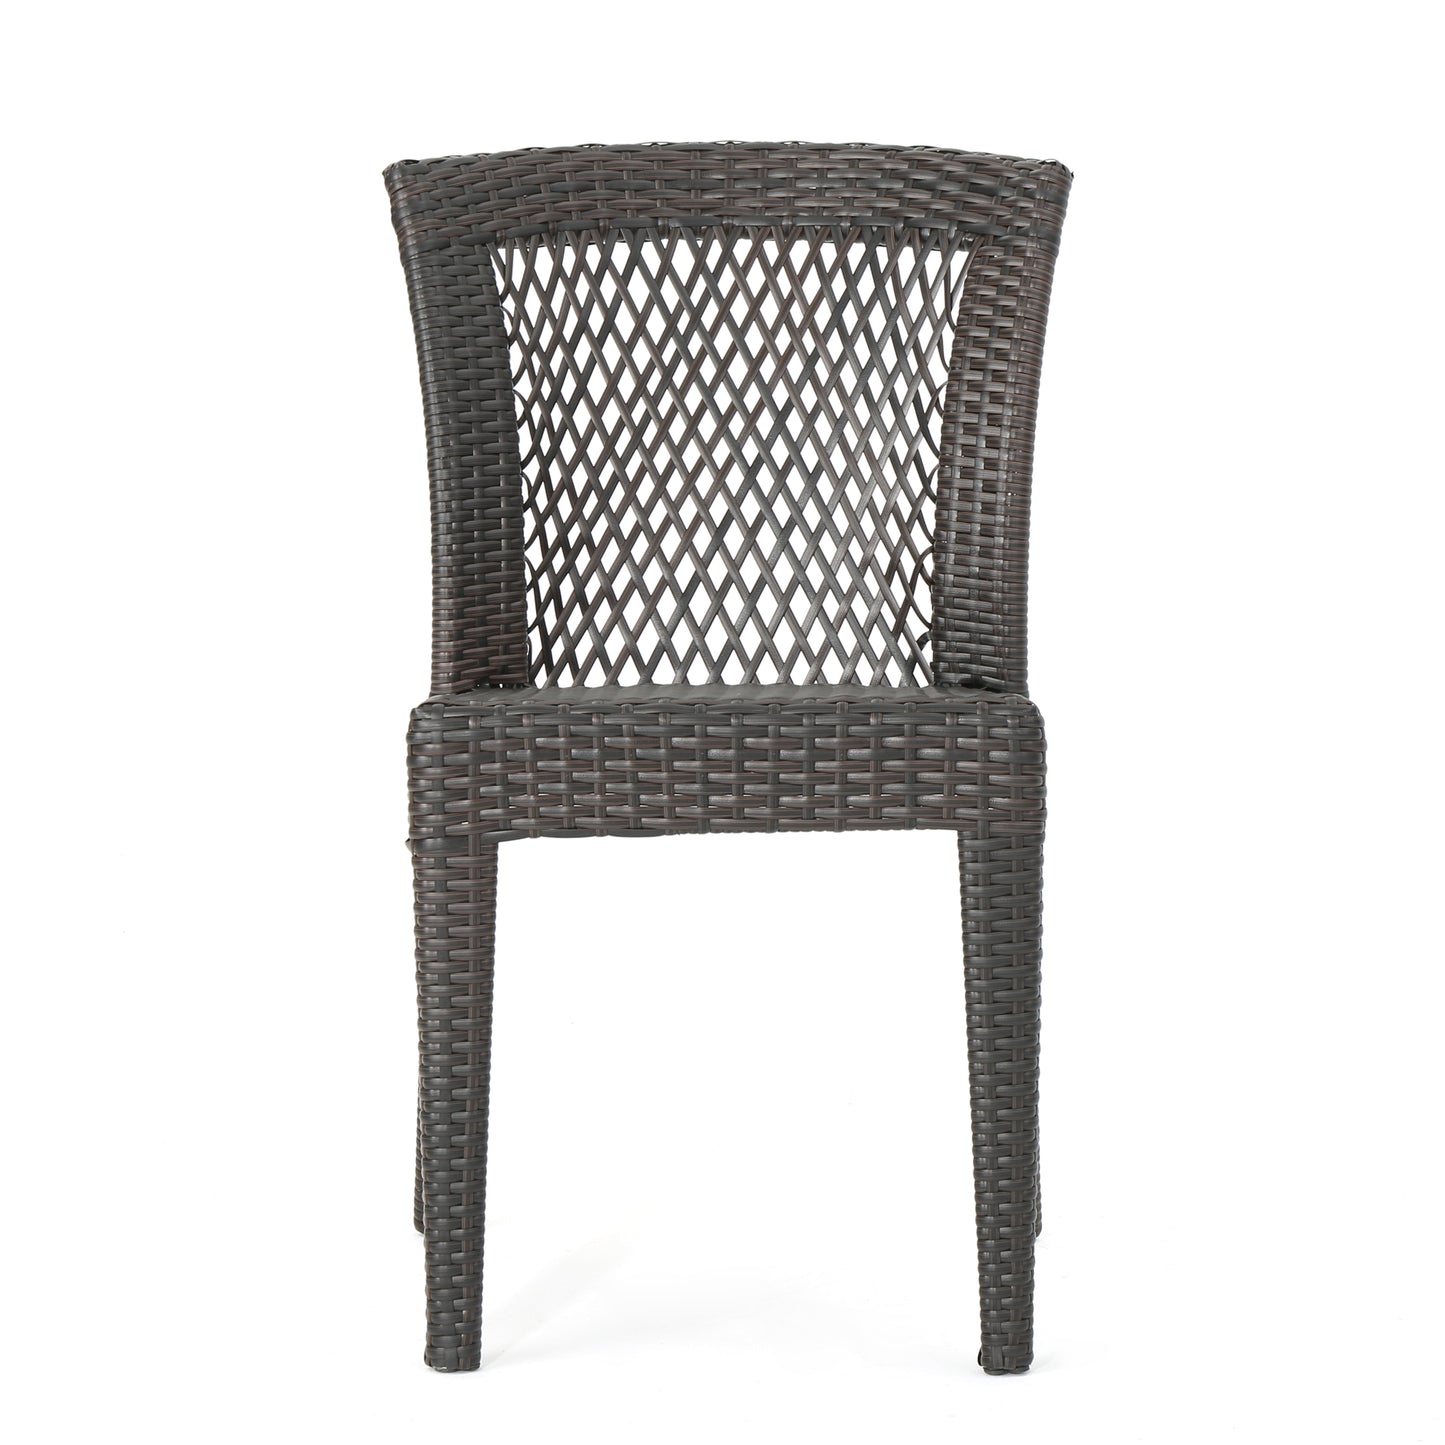 Chatham Outdoor Multi-brown Wicker Stacking Dining Chairs (Set of 4)